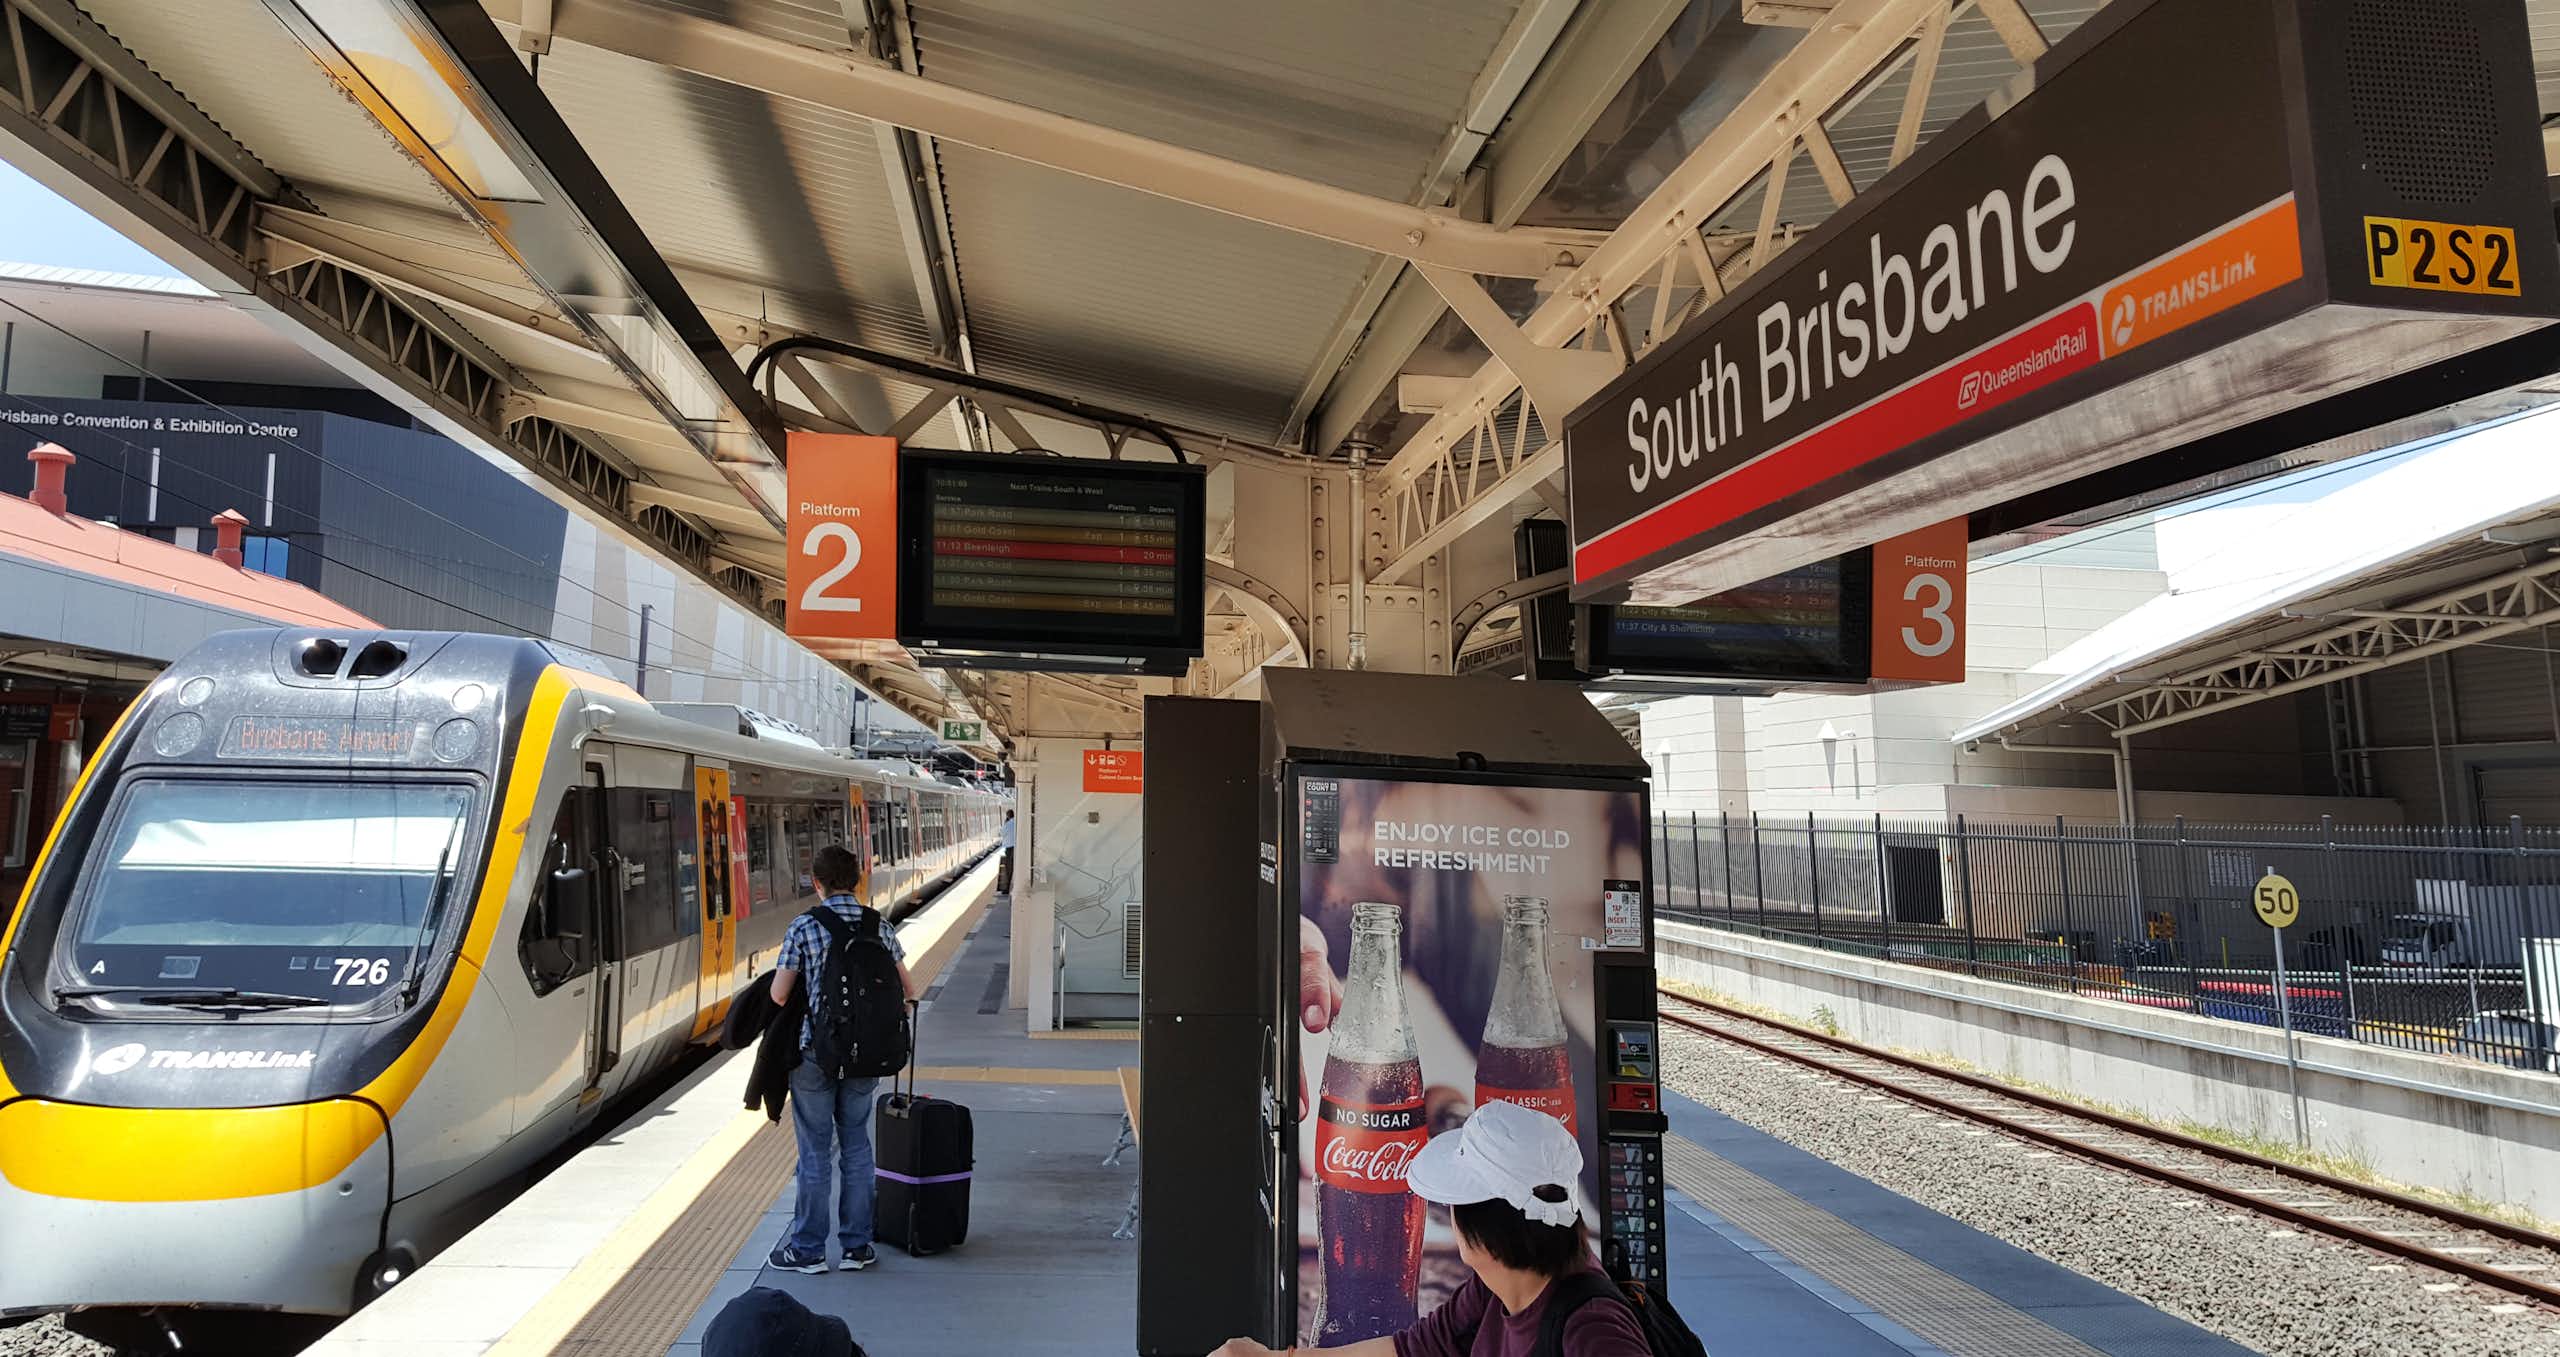 Train pulls into South Brisbane station, man seen waiting on platform with suitcase